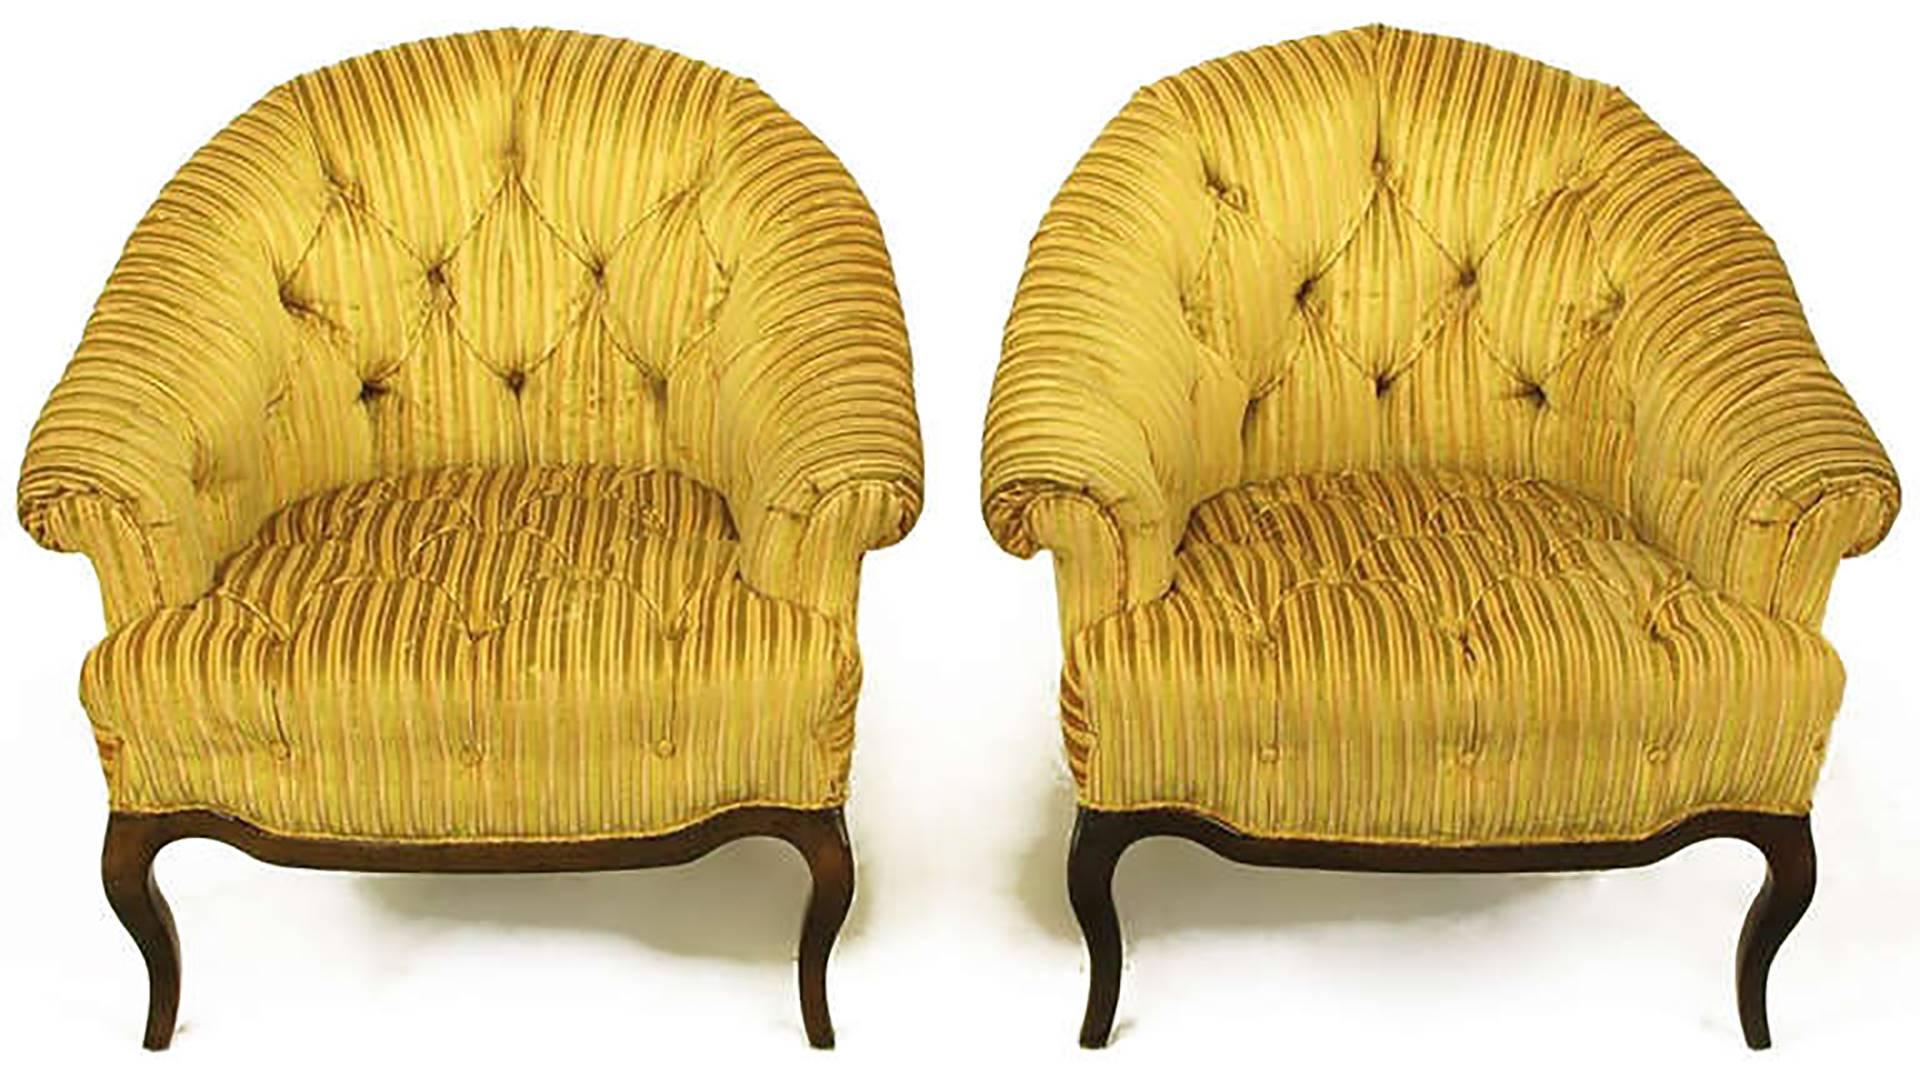 Pair of button tufted, cut and striped gold velvet lounge chairs with rolled sloping arms and barrel back by Interior Crafts, Chicago custom furniture manufacturer to the trade. Carved walnut cabriole legs with scalloped walnut apron. Among others,